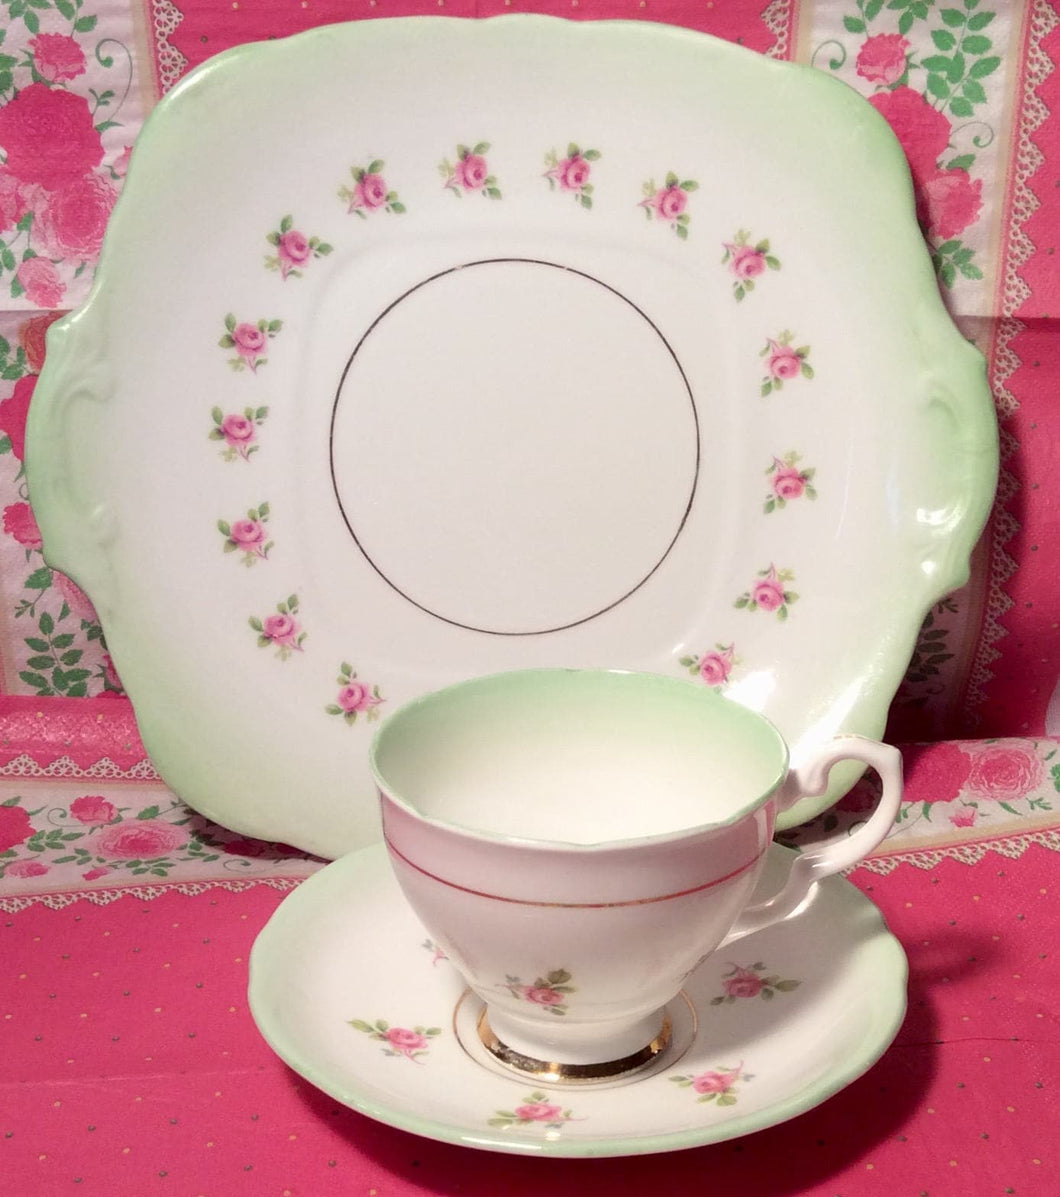 Pretty in Pink- and Green-Royal Stafford Teacup and Saucer Cake Plate Trio